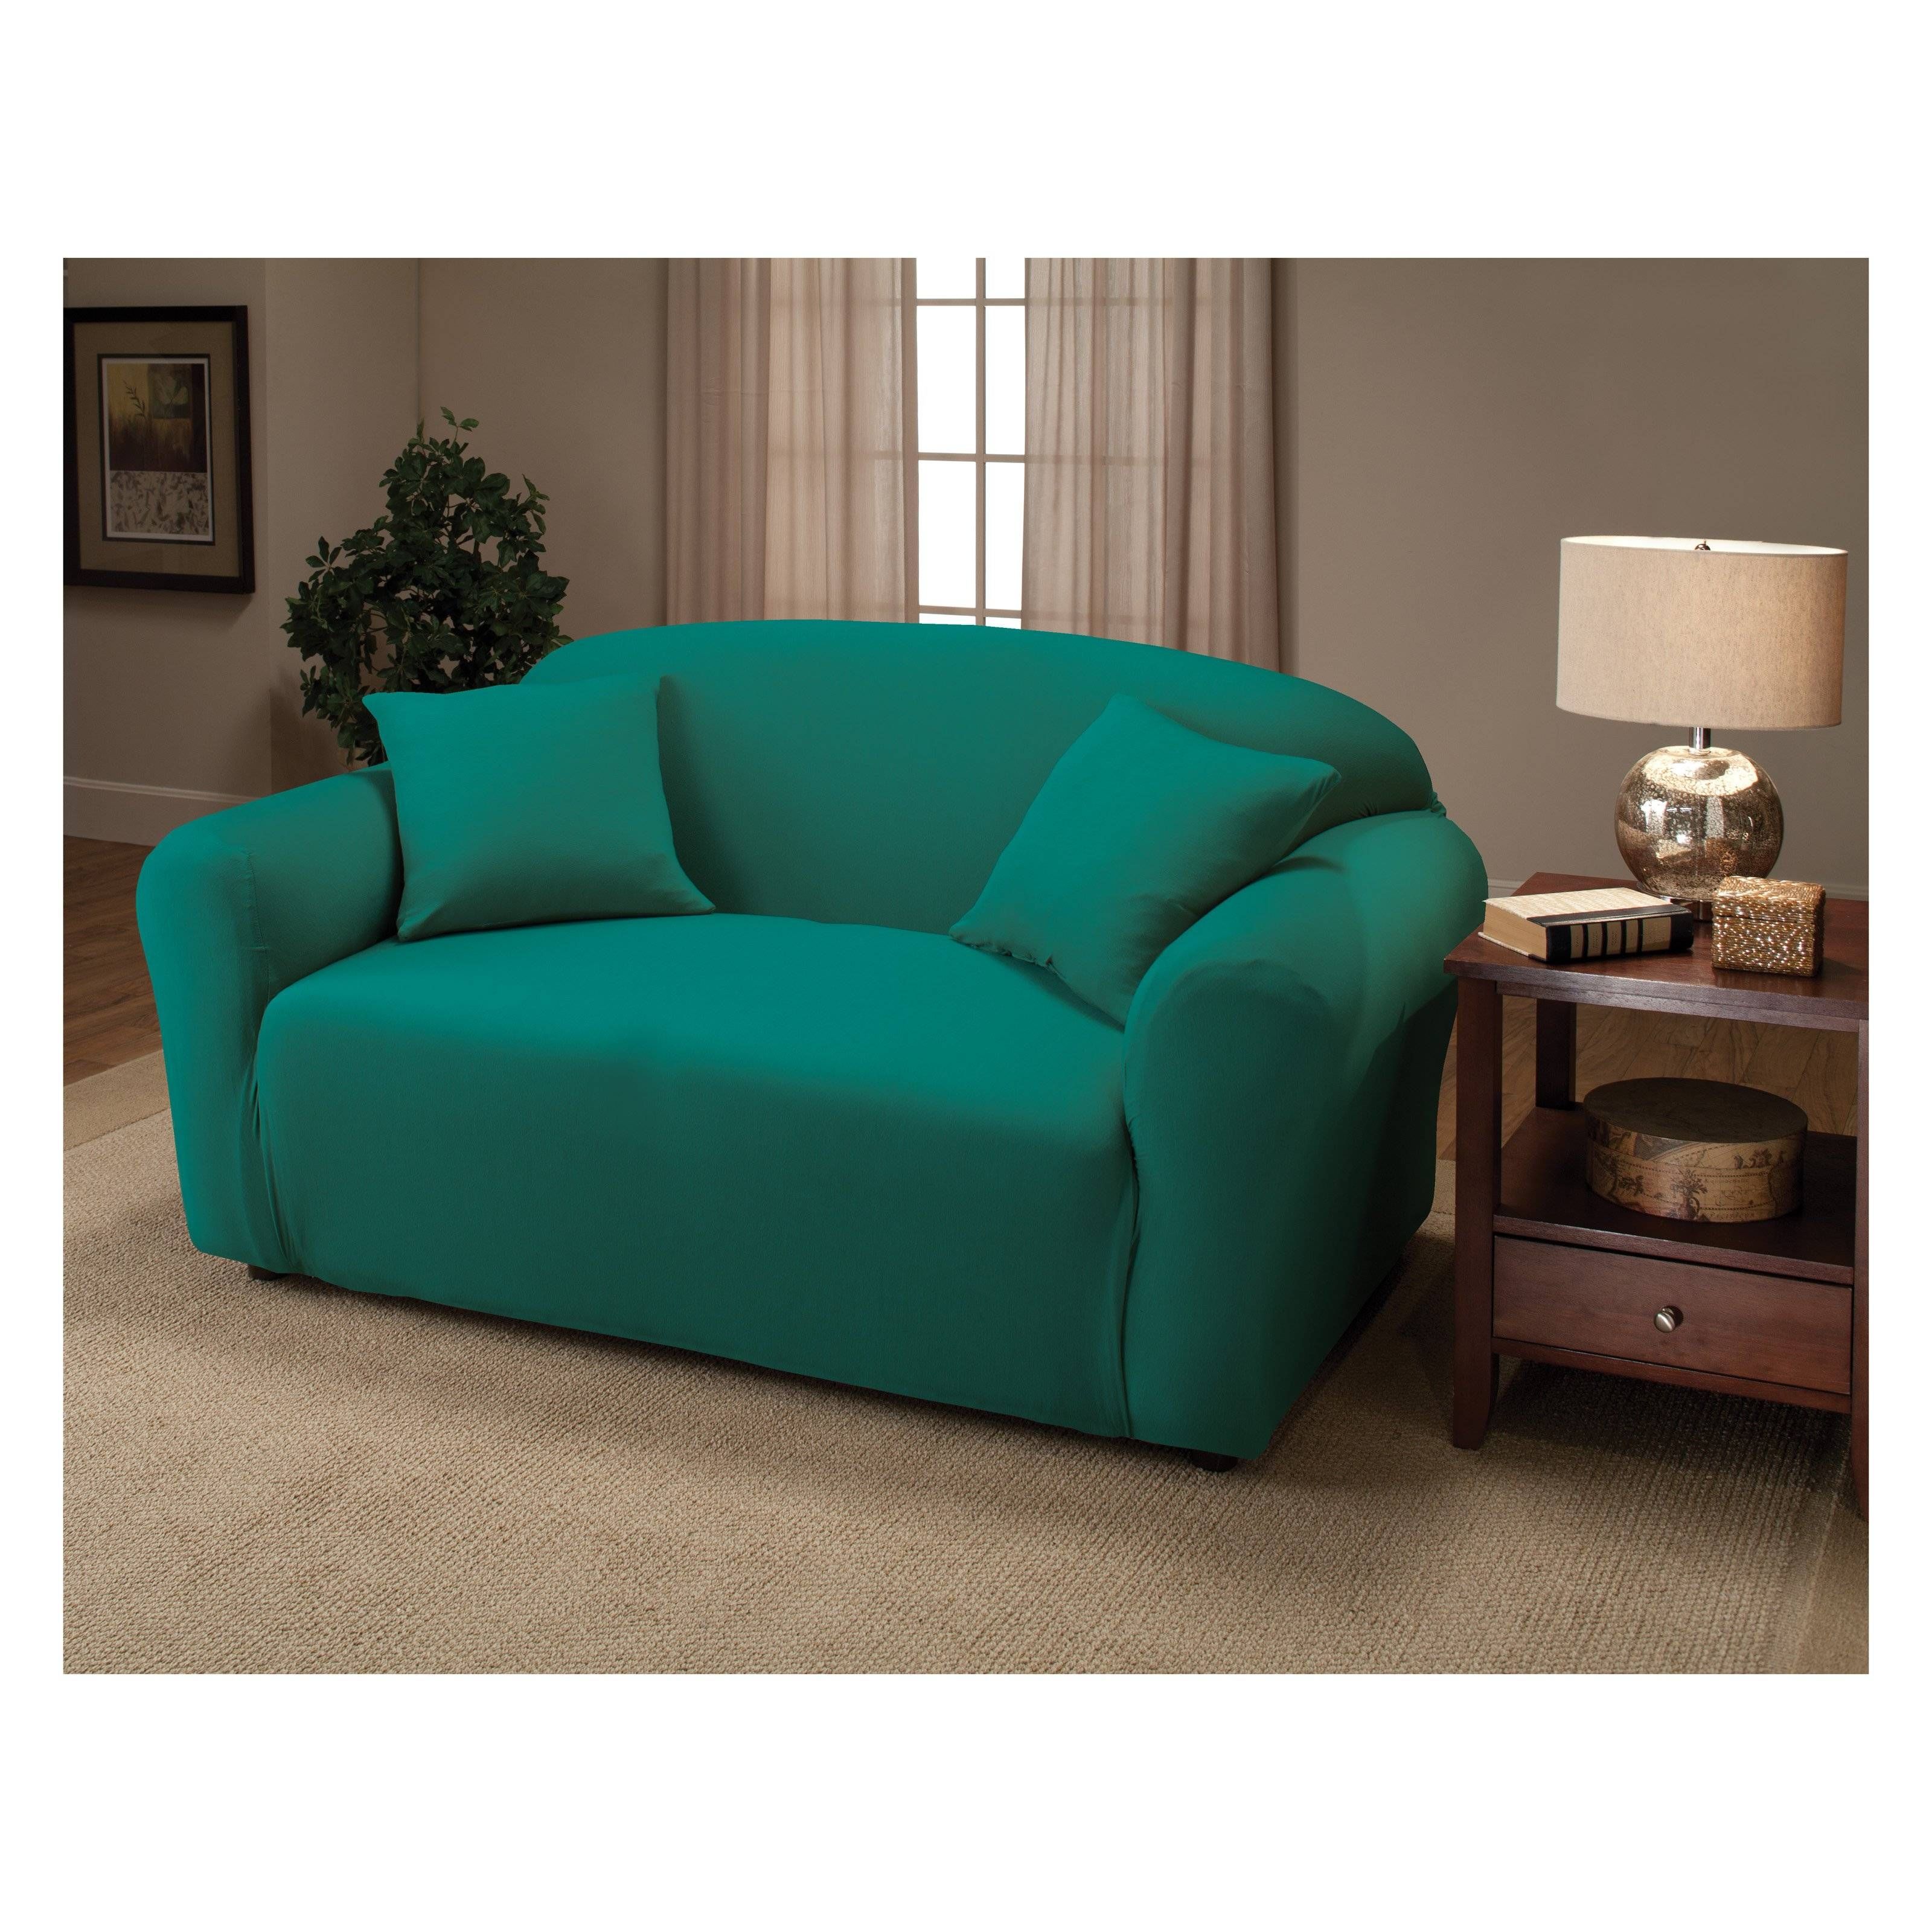 Sure Fit Stretch Pique Three Piece Loveseat Slipcover | Hayneedle Pertaining To Sofa Loveseat Slipcovers (View 9 of 30)